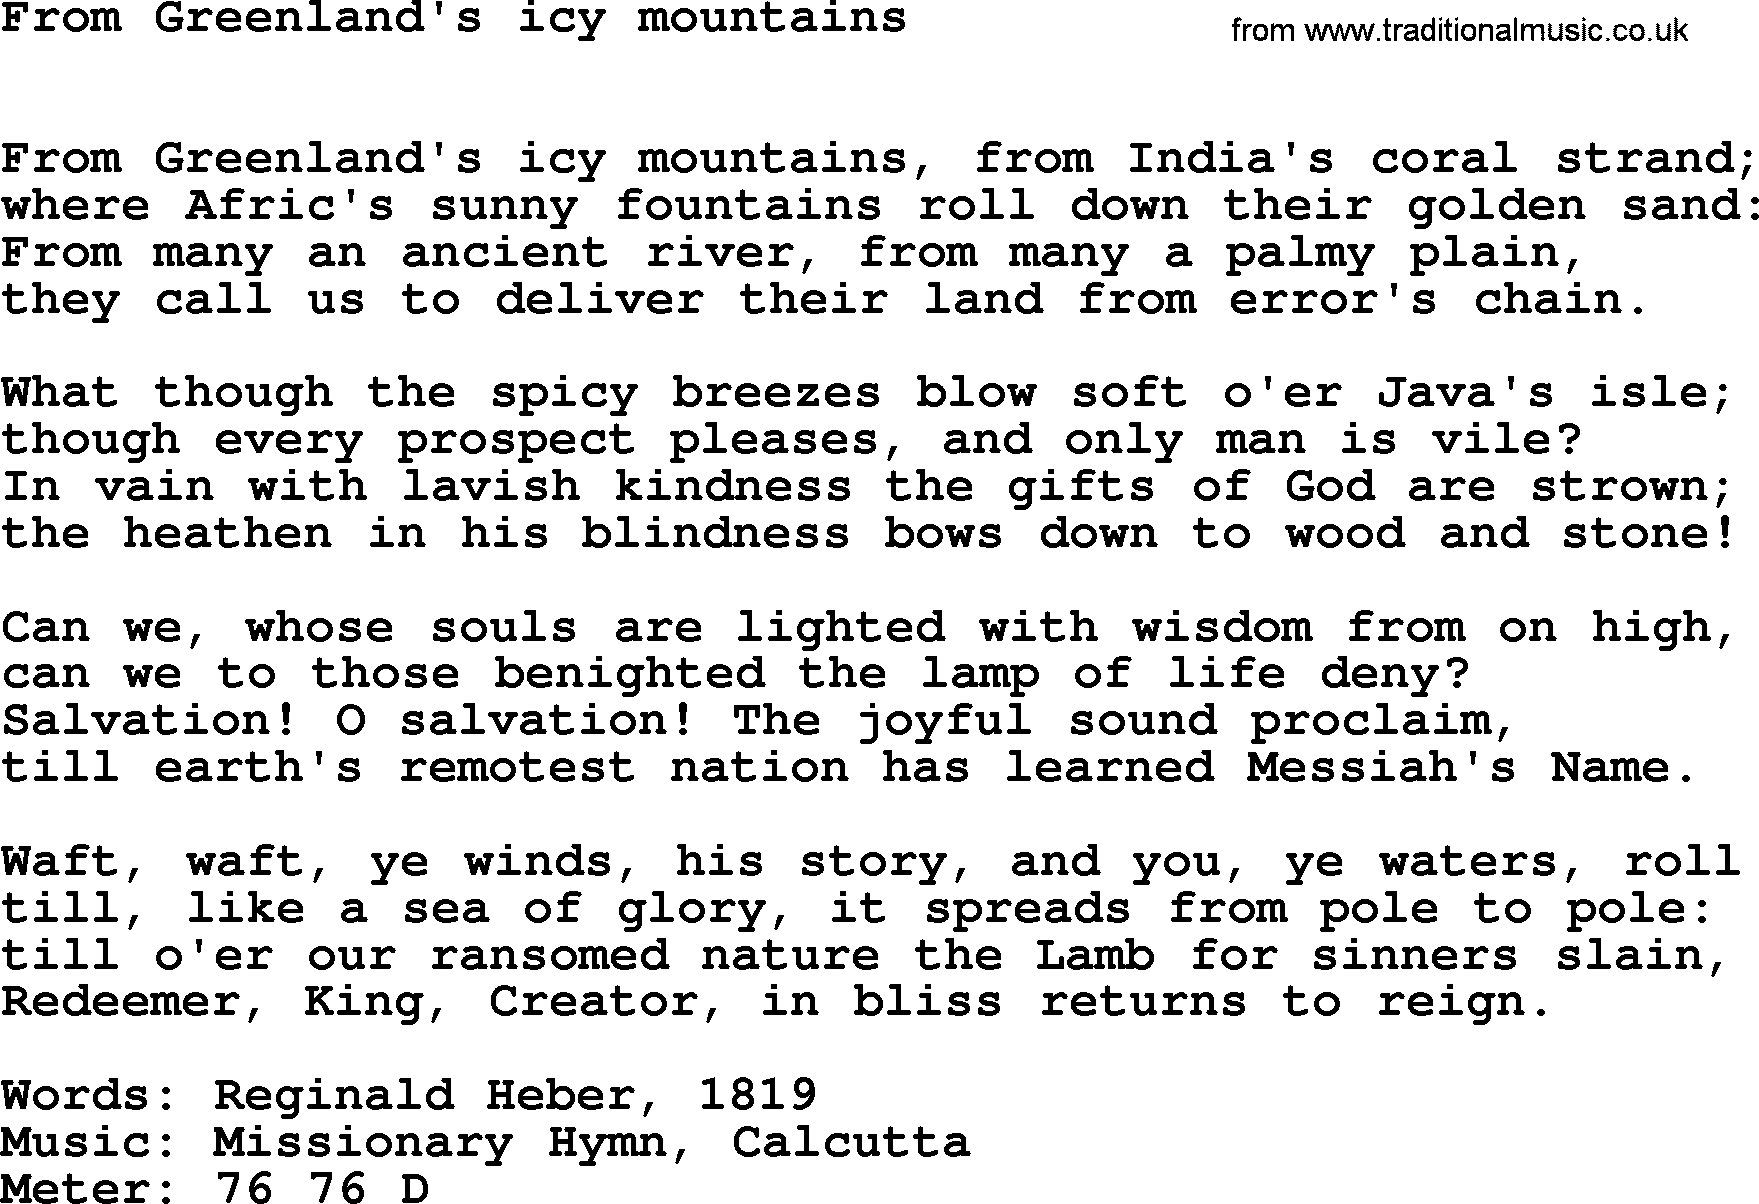 Book of Common Praise Hymn: From Greenland's Icy Mountains.txt lyrics with midi music